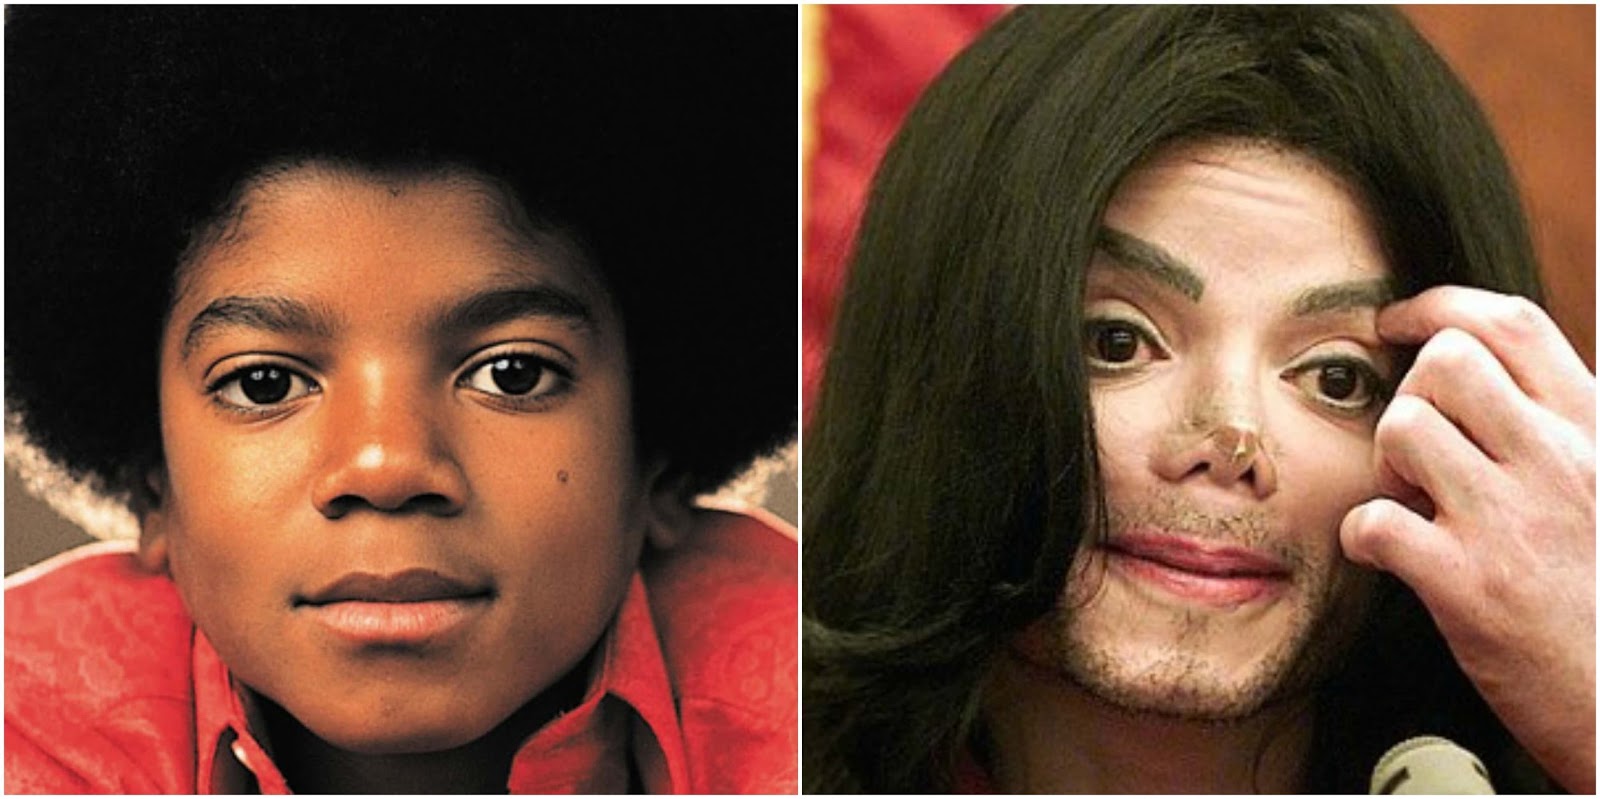 Here's How Michael Jackson Would Have Looked Like Without Cosmetic Surgery